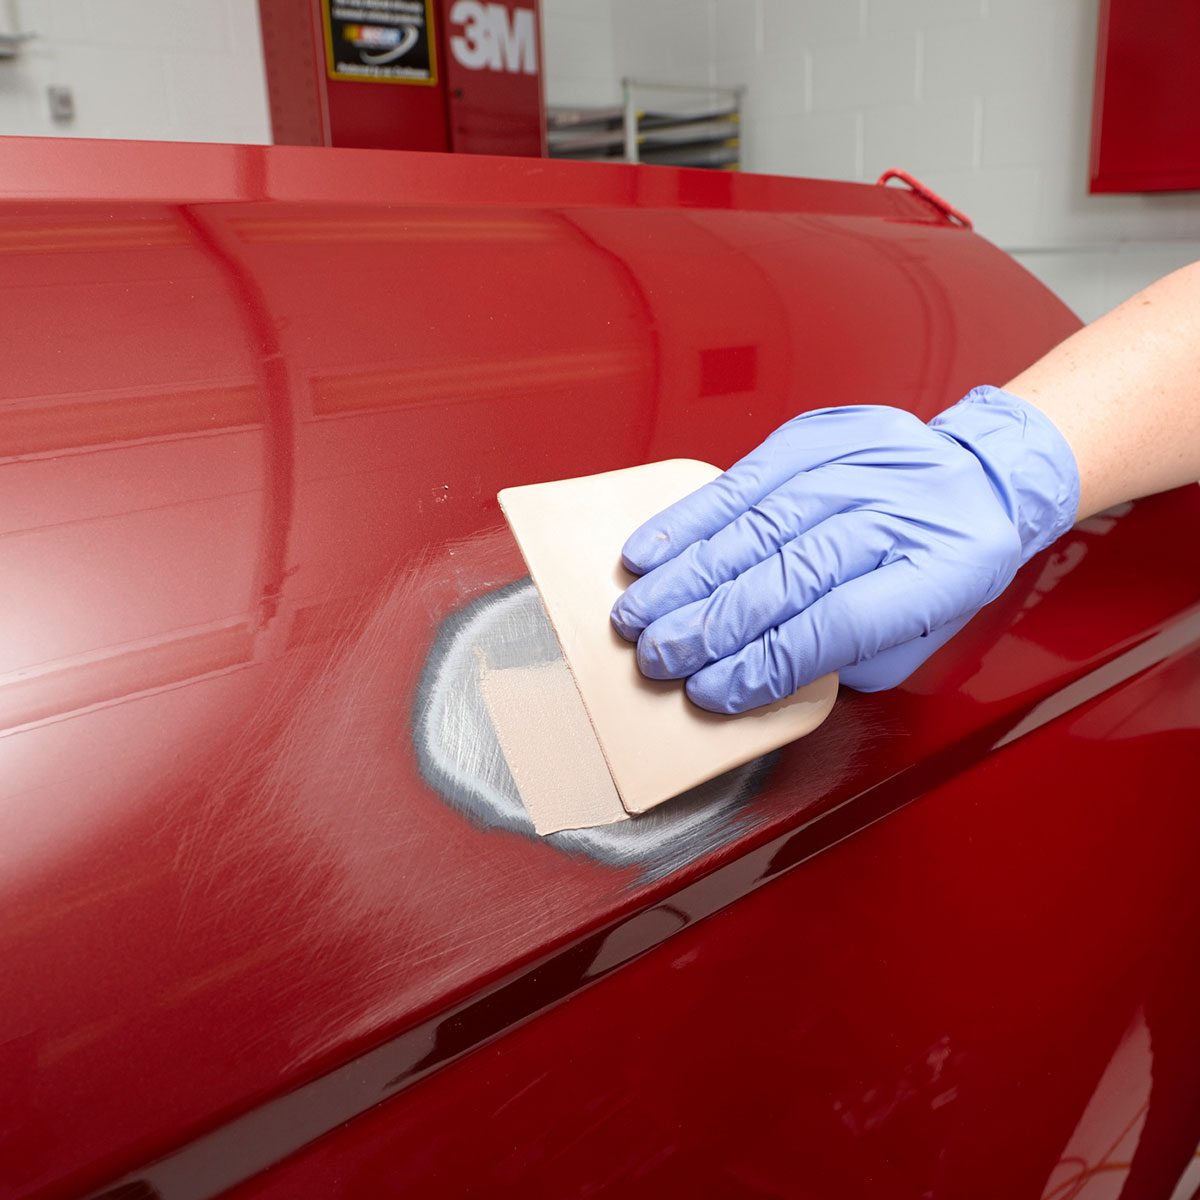 Car Dent Repair: How to Fix a Dent In Your Car